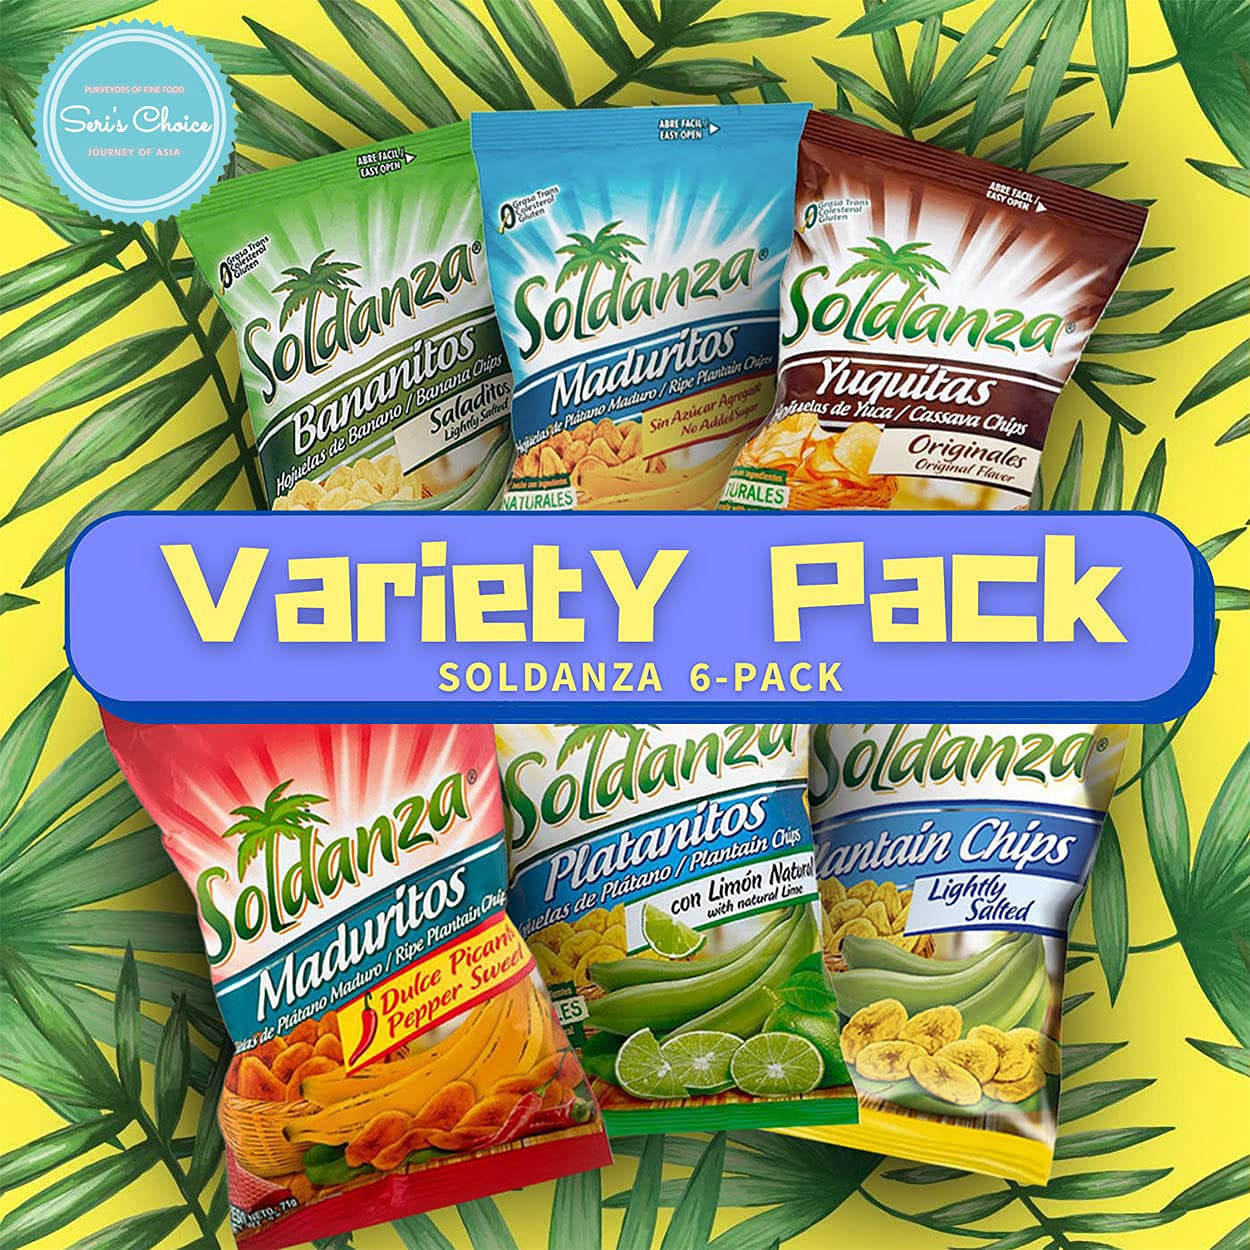 Father'S Day Journey of Snacks "International Snack" Soldanza Plantain Chips Variety Pack 2.5Oz (Pack of 6) (6 Mix)